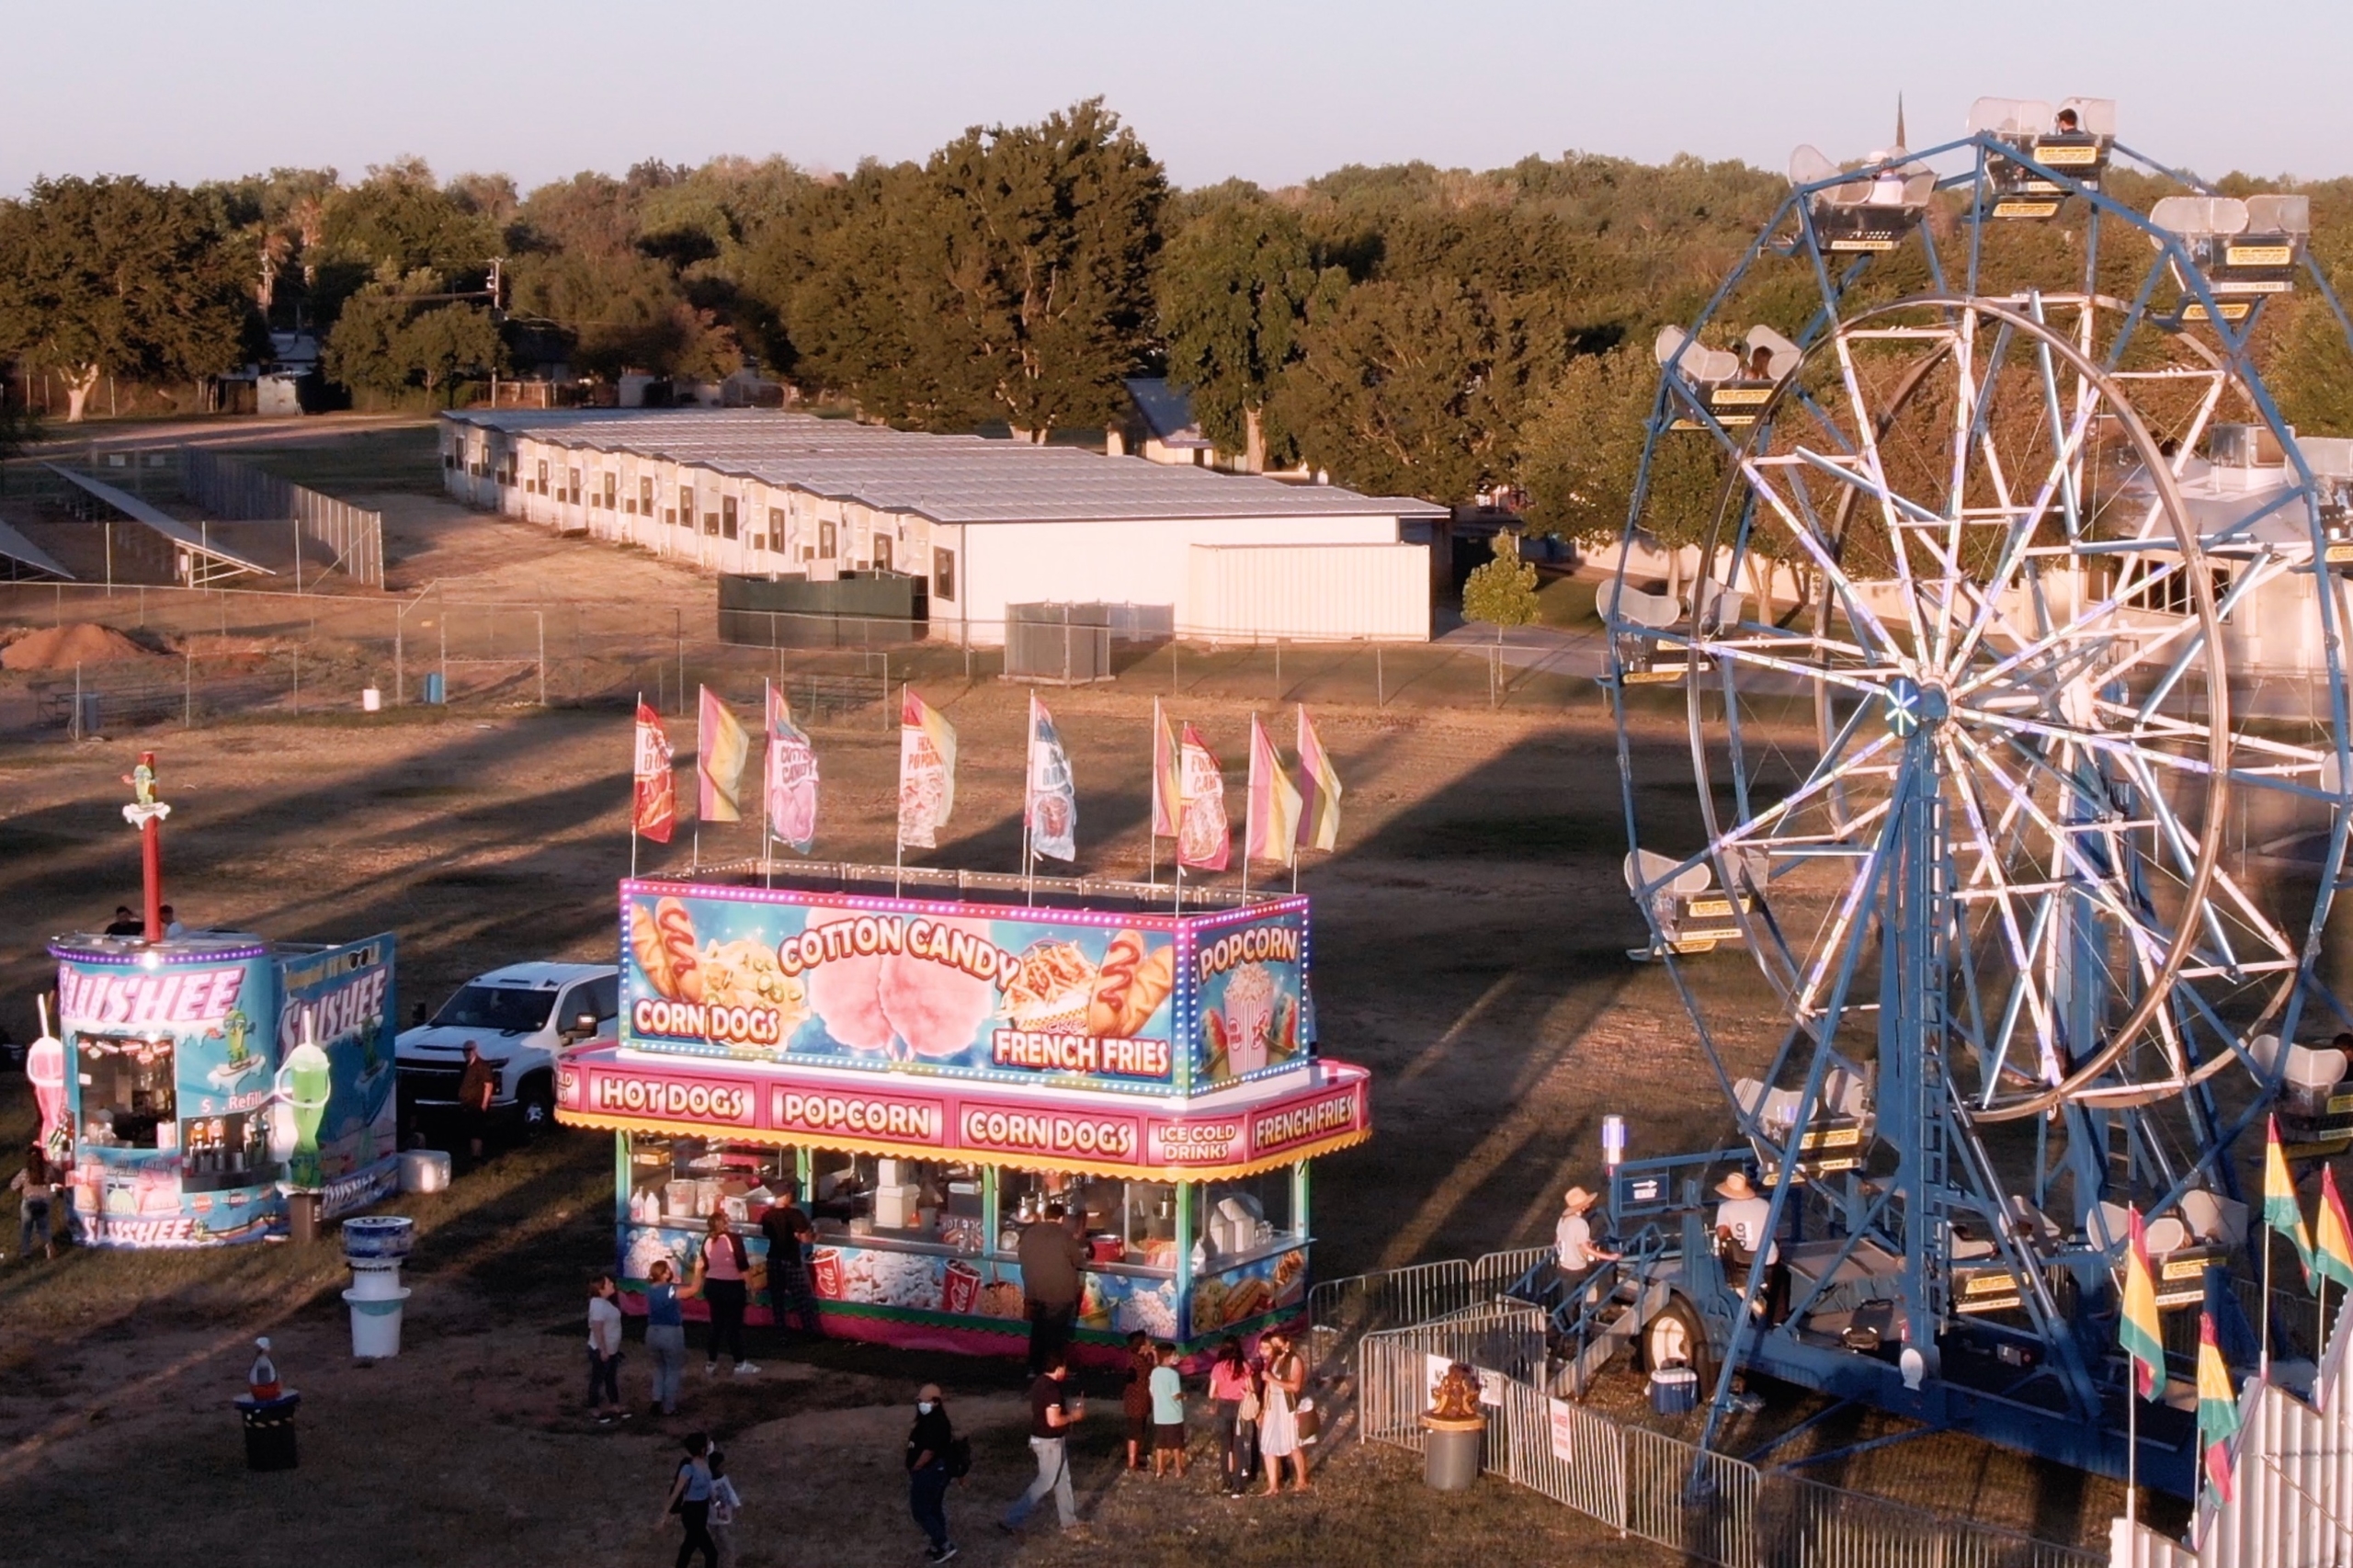 Arial shot of a carnival, showing a ferris wheel, slushee stand and hot dog stand. People are milling about below.